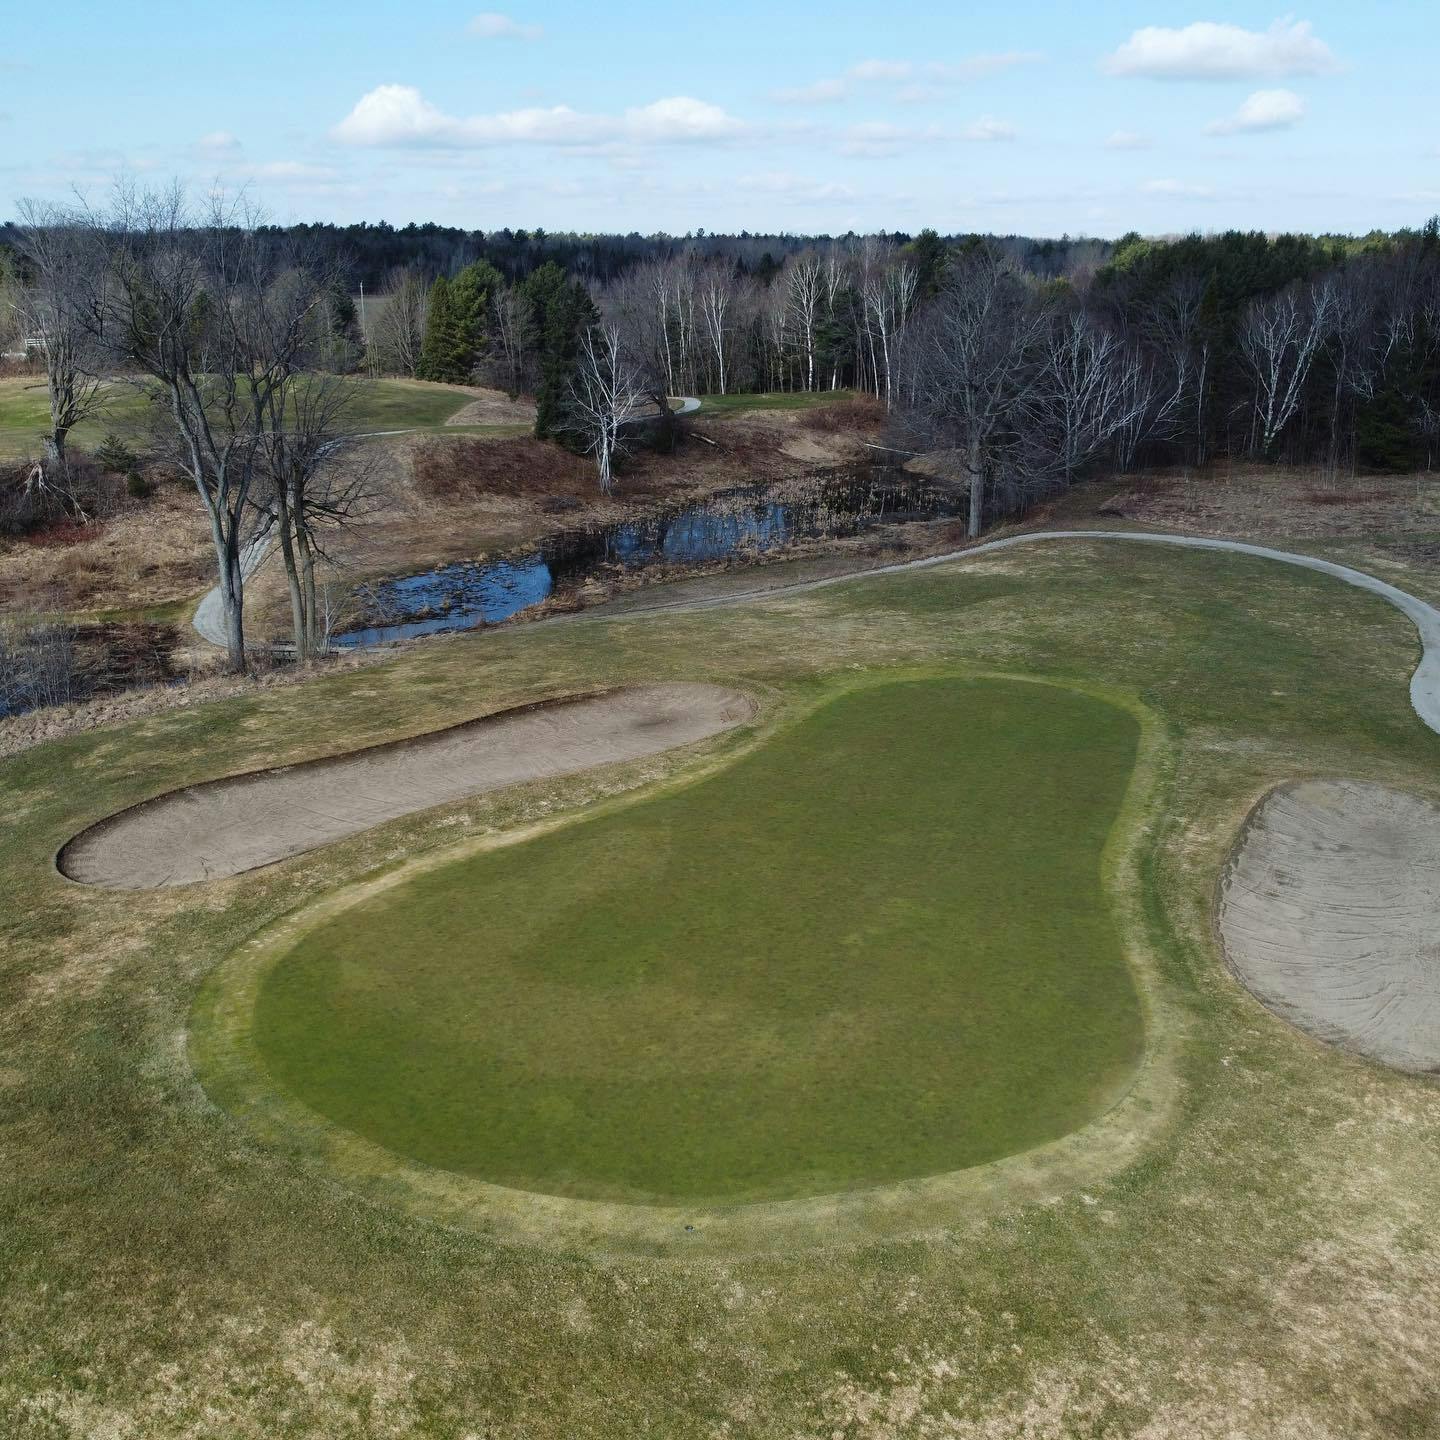 The course is starting to dry out. Stay tuned for opening day announcement! #PlayTheLake